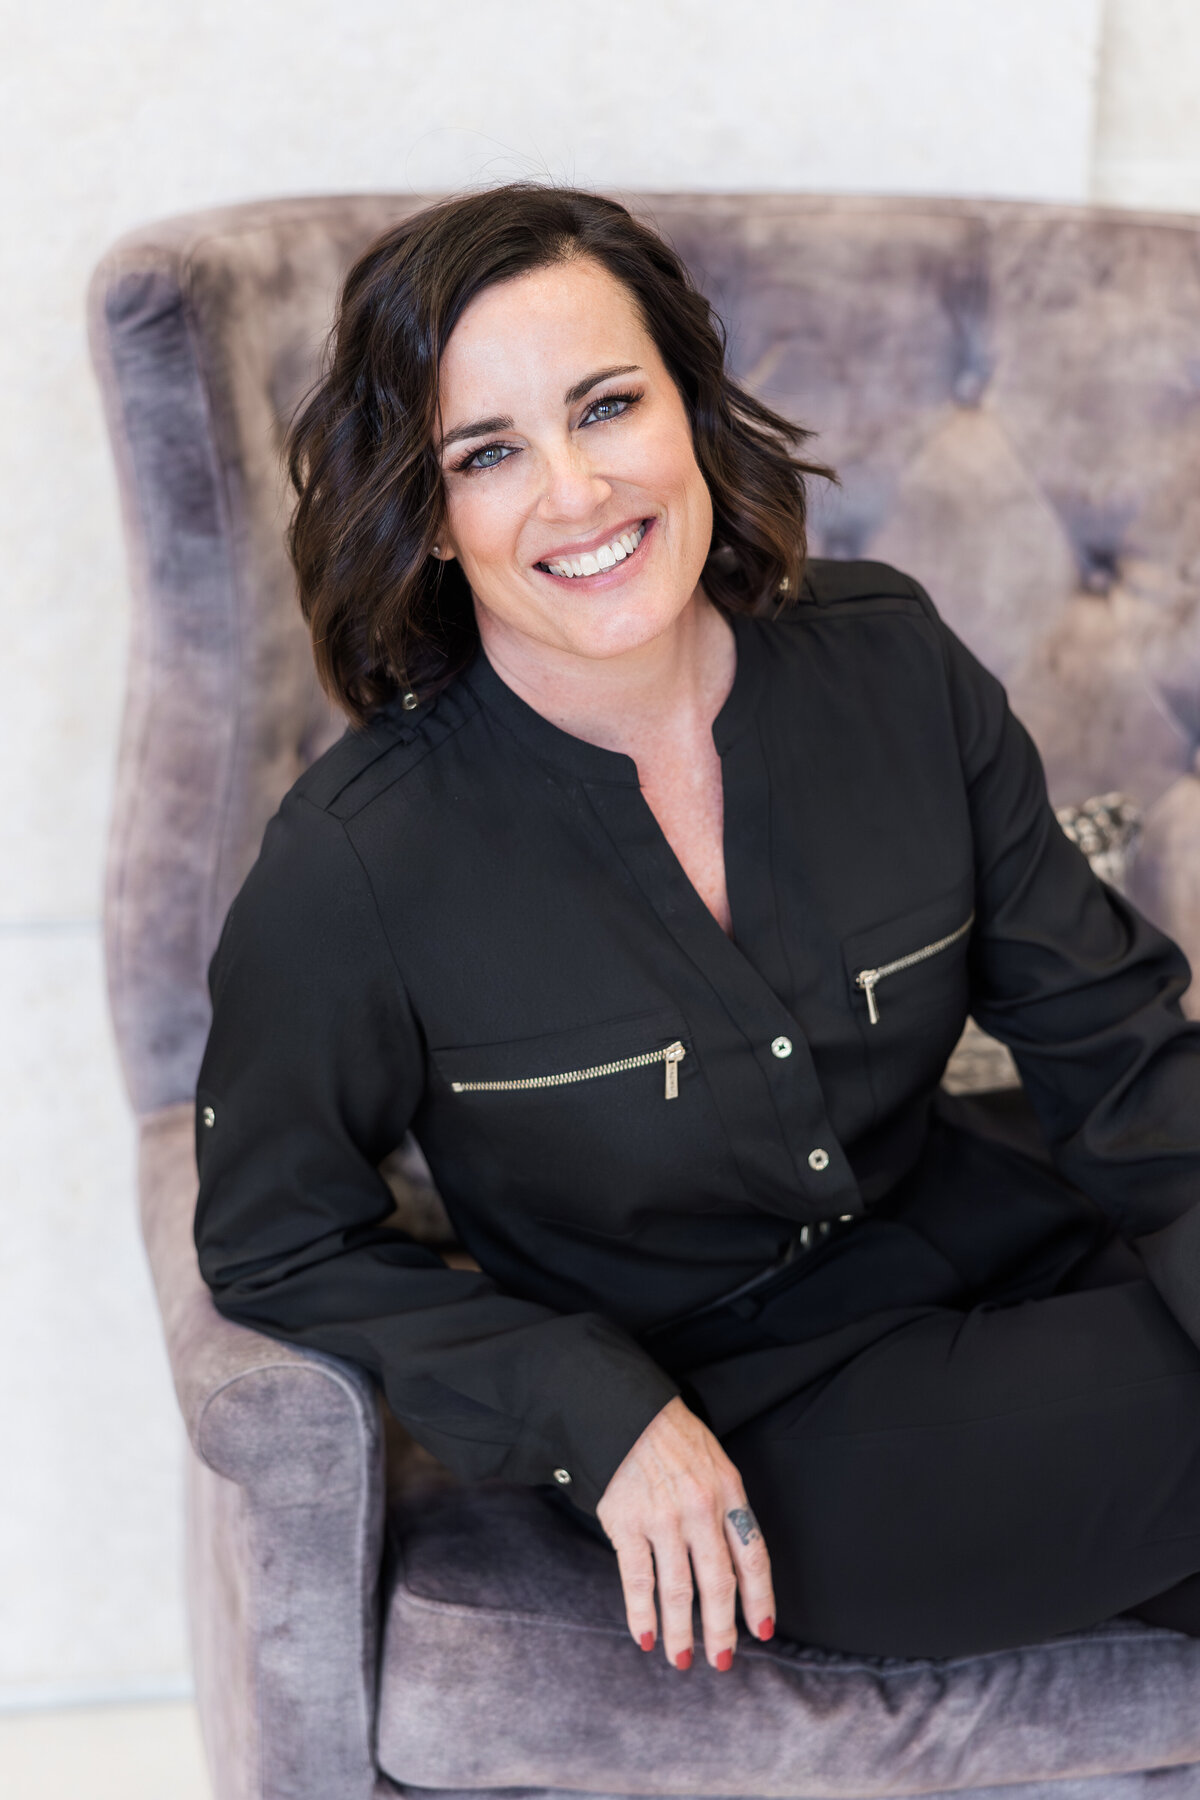 personal-branding-photo-shoot-realtor-sitting-in-chair